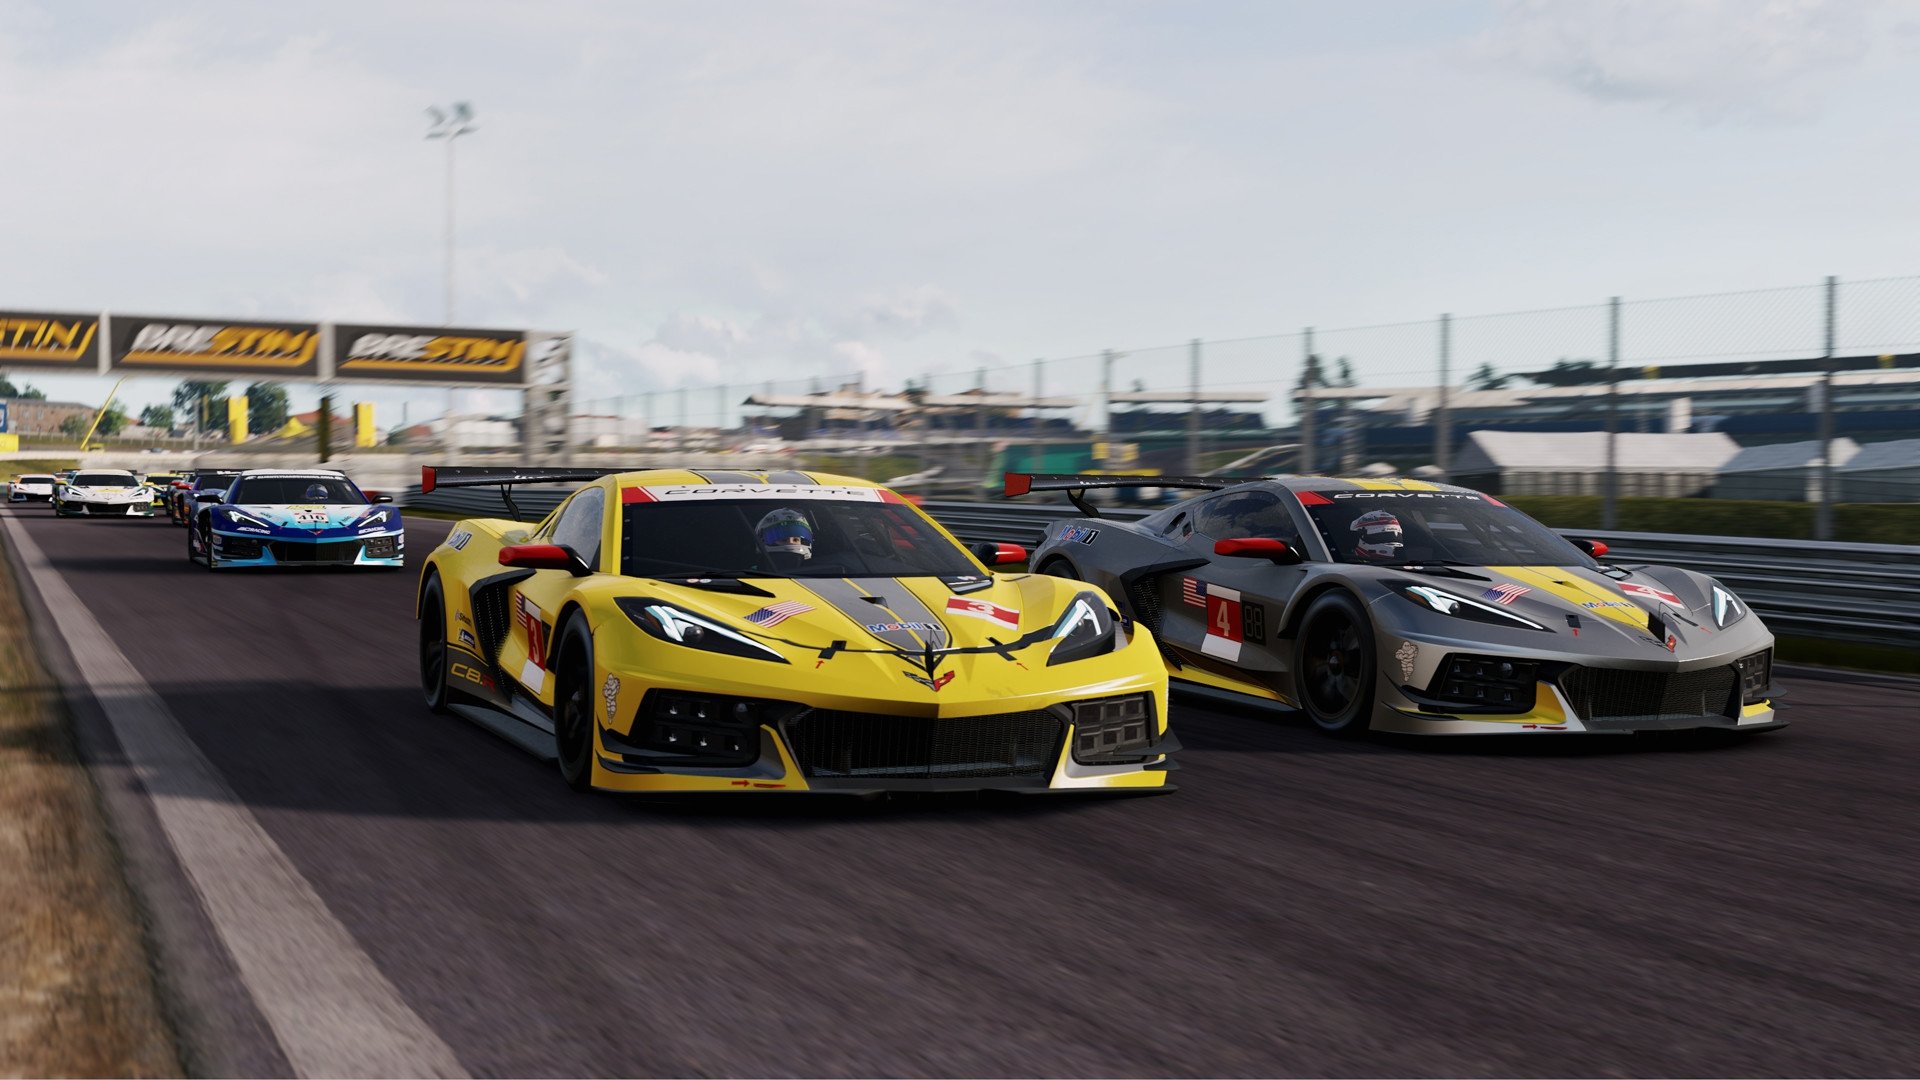 Project Cars 2020 Wallpapers